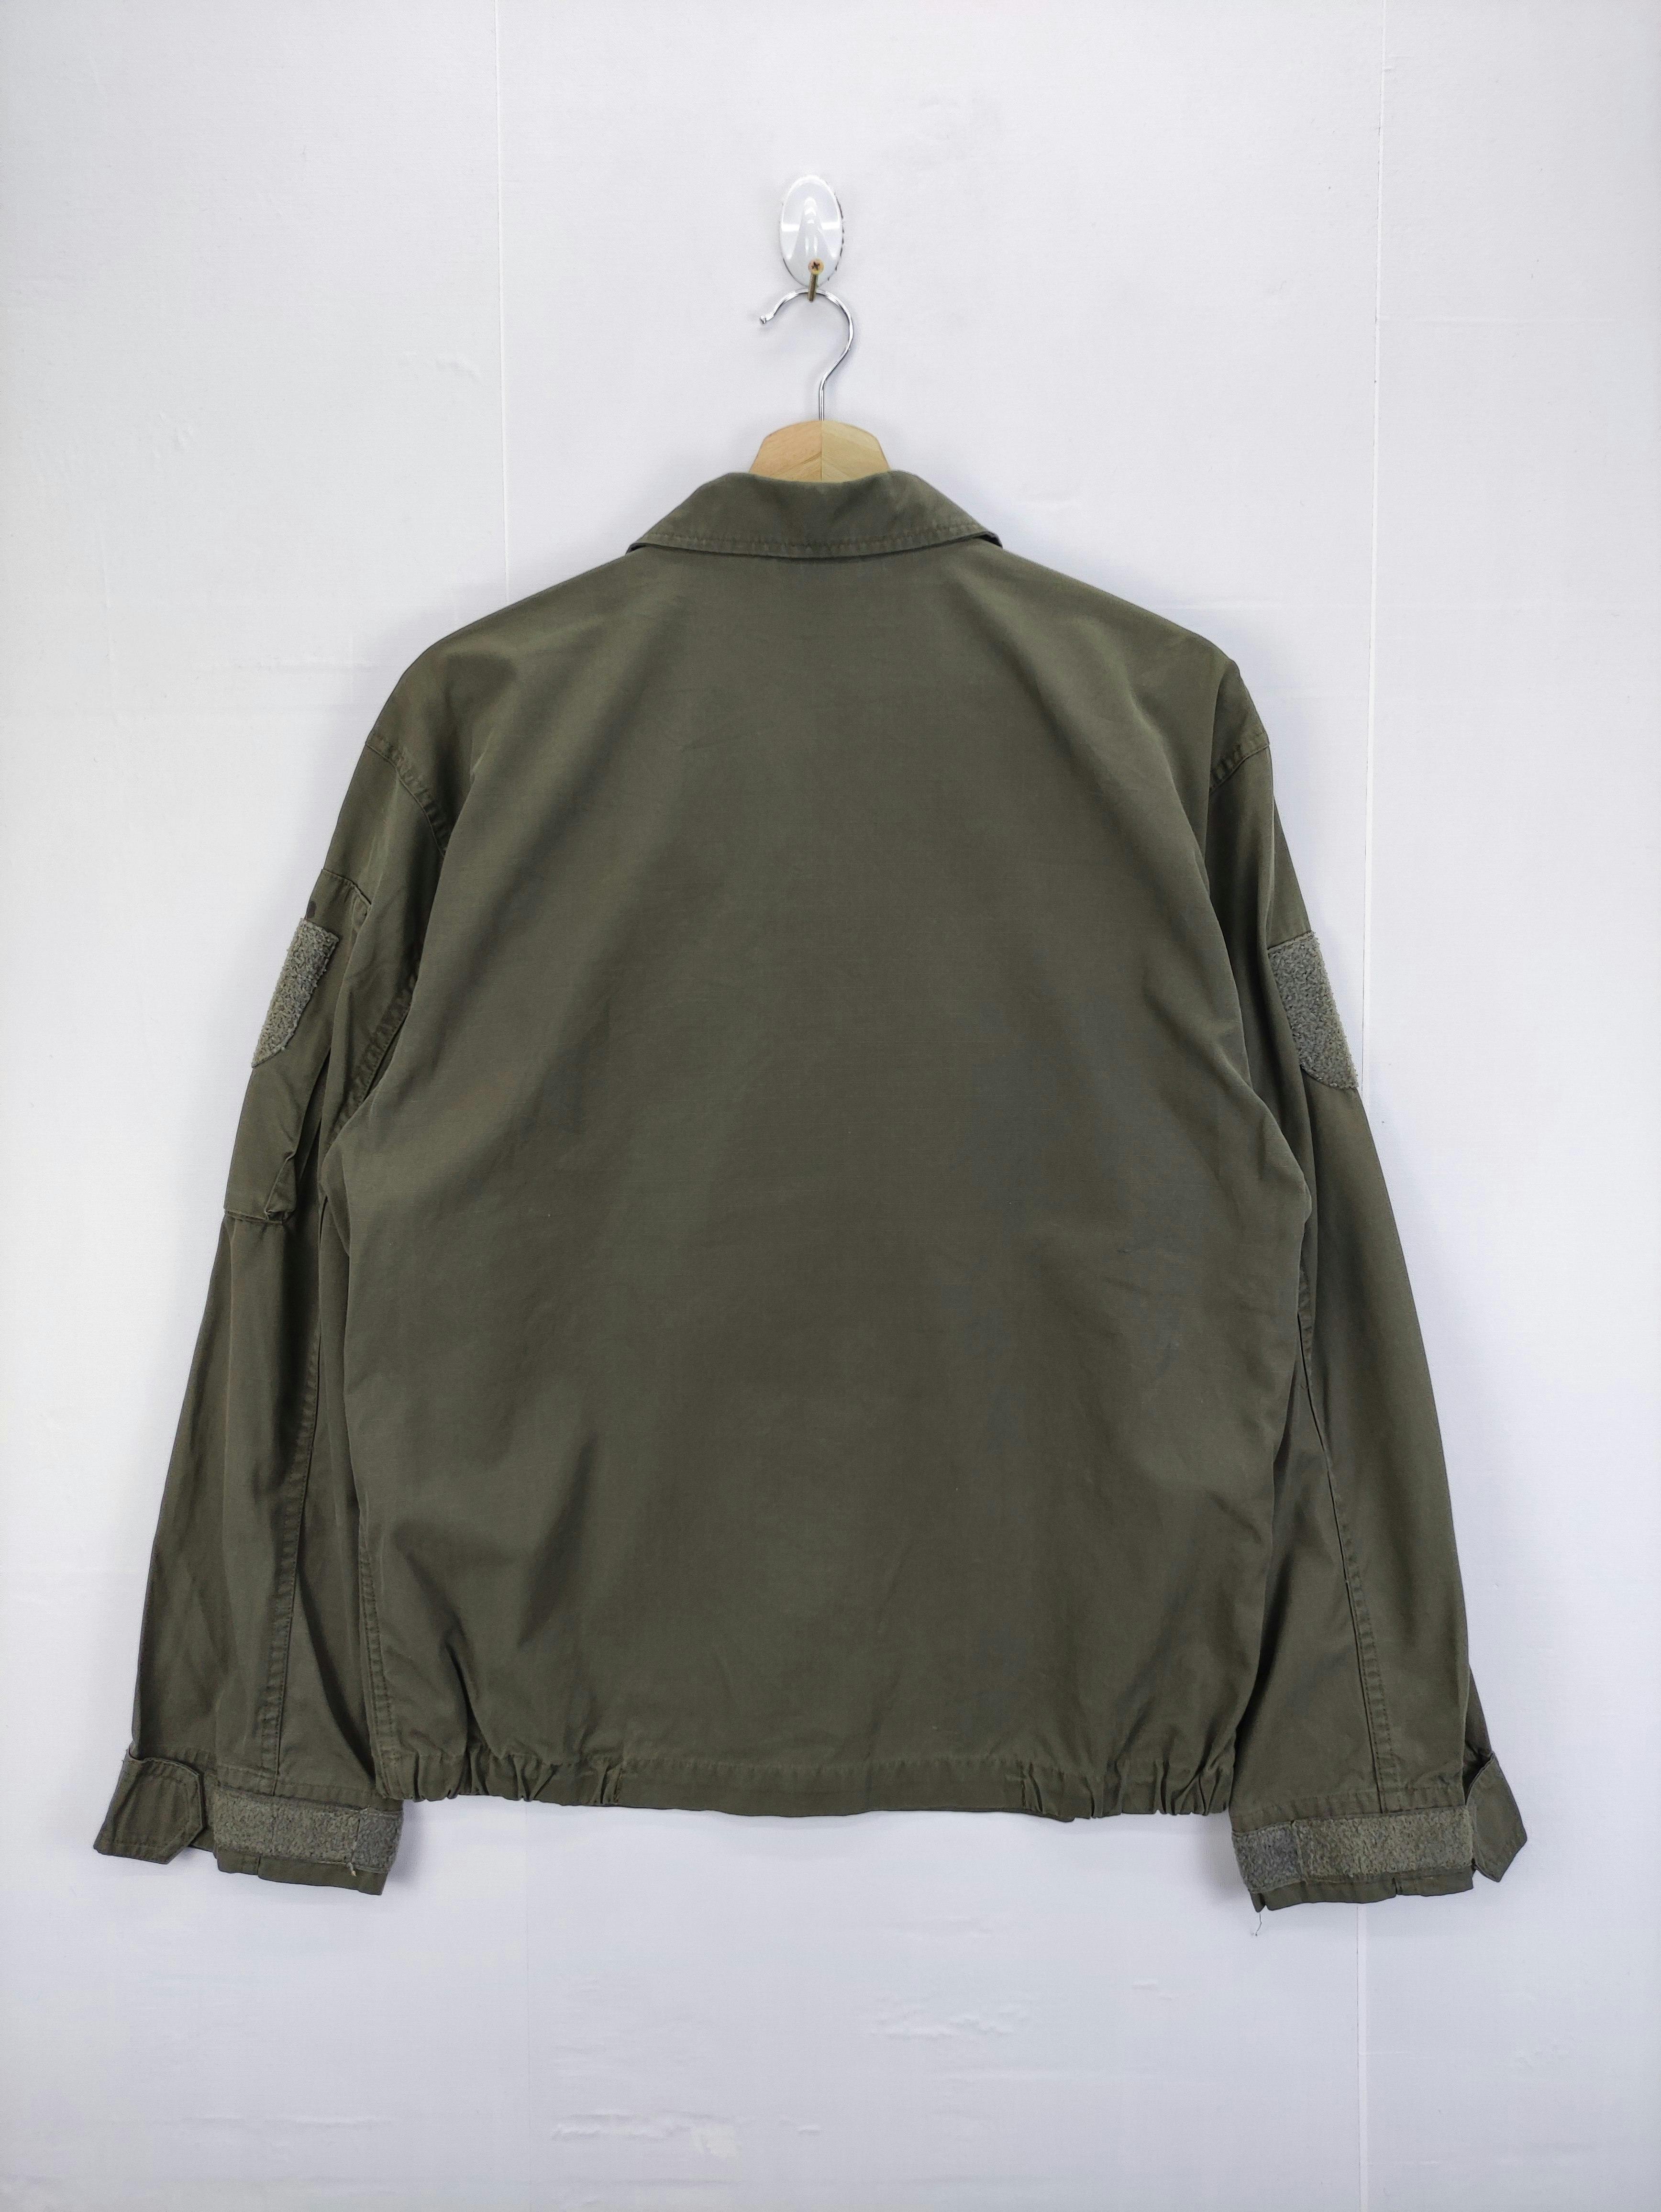 Vintage Army Jacket Button Up - 7